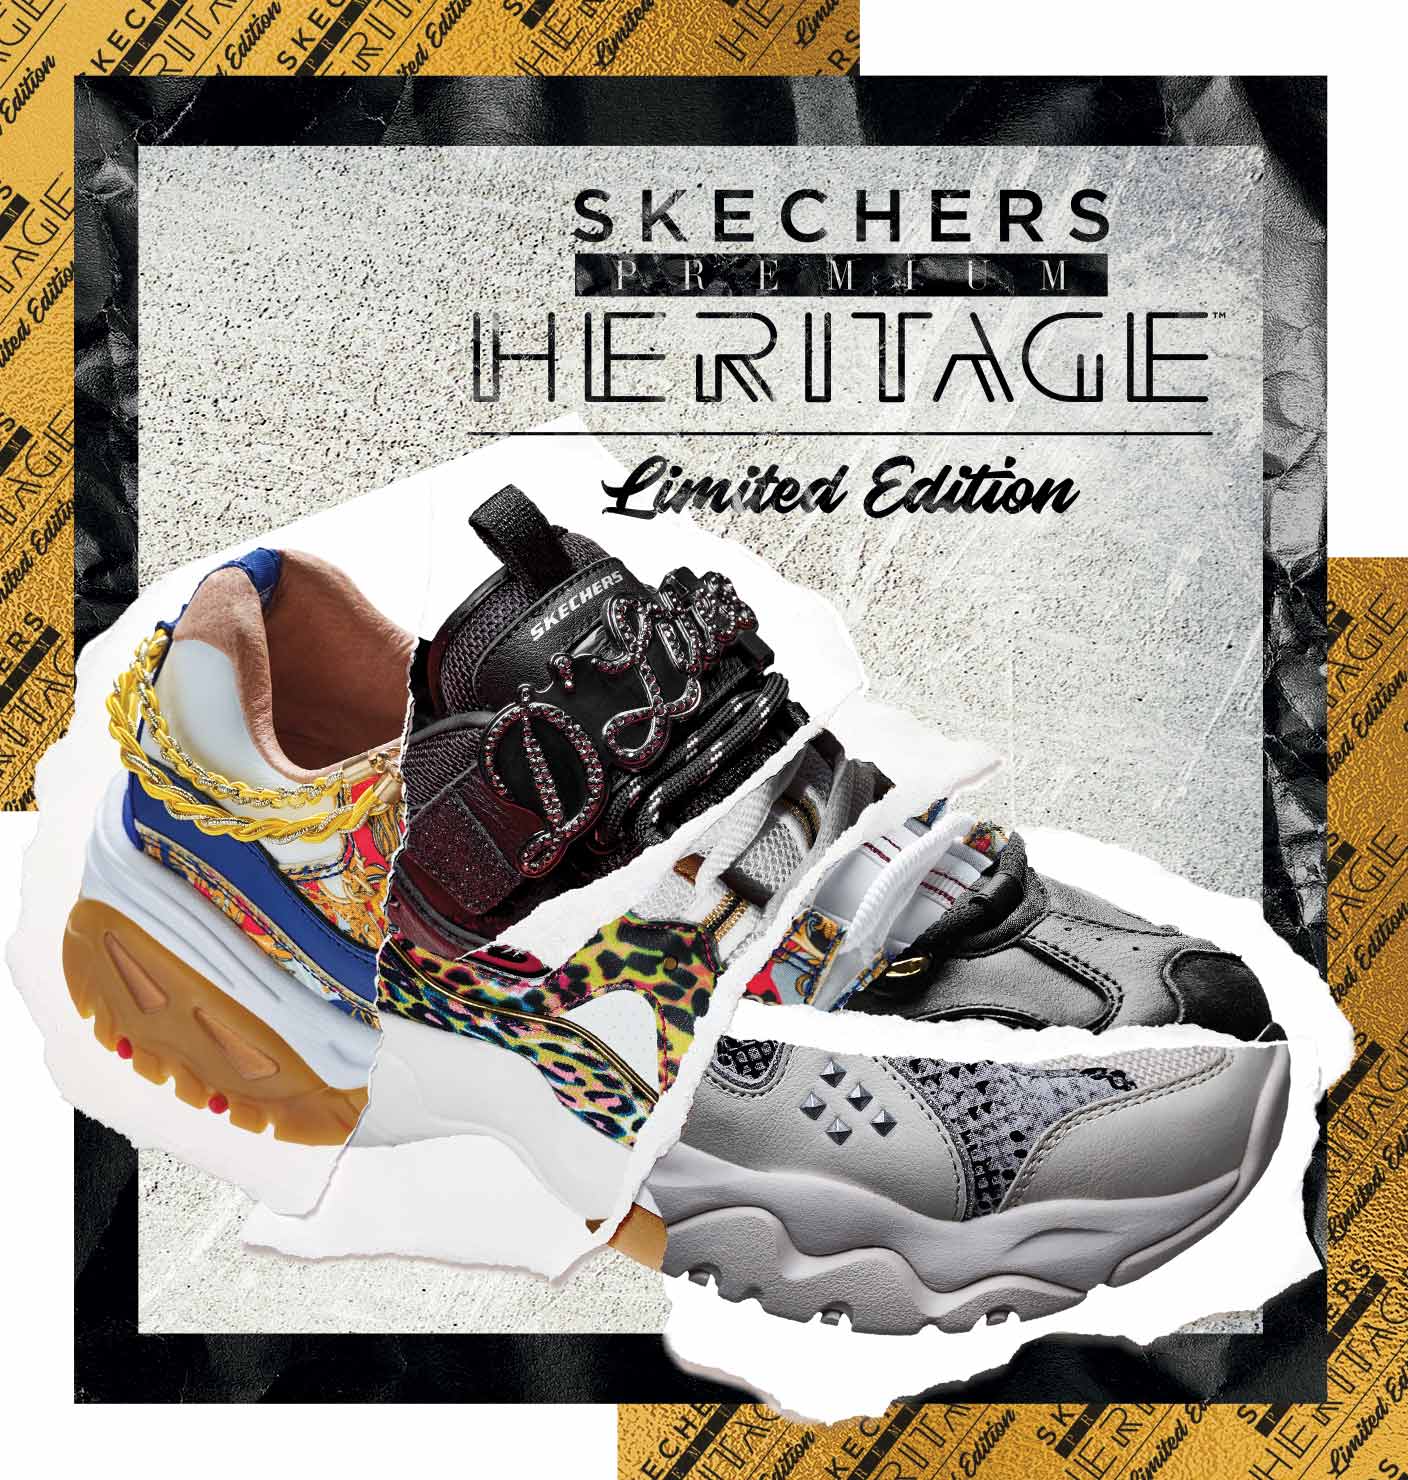 skechers new collection 2018 Sale,up to 